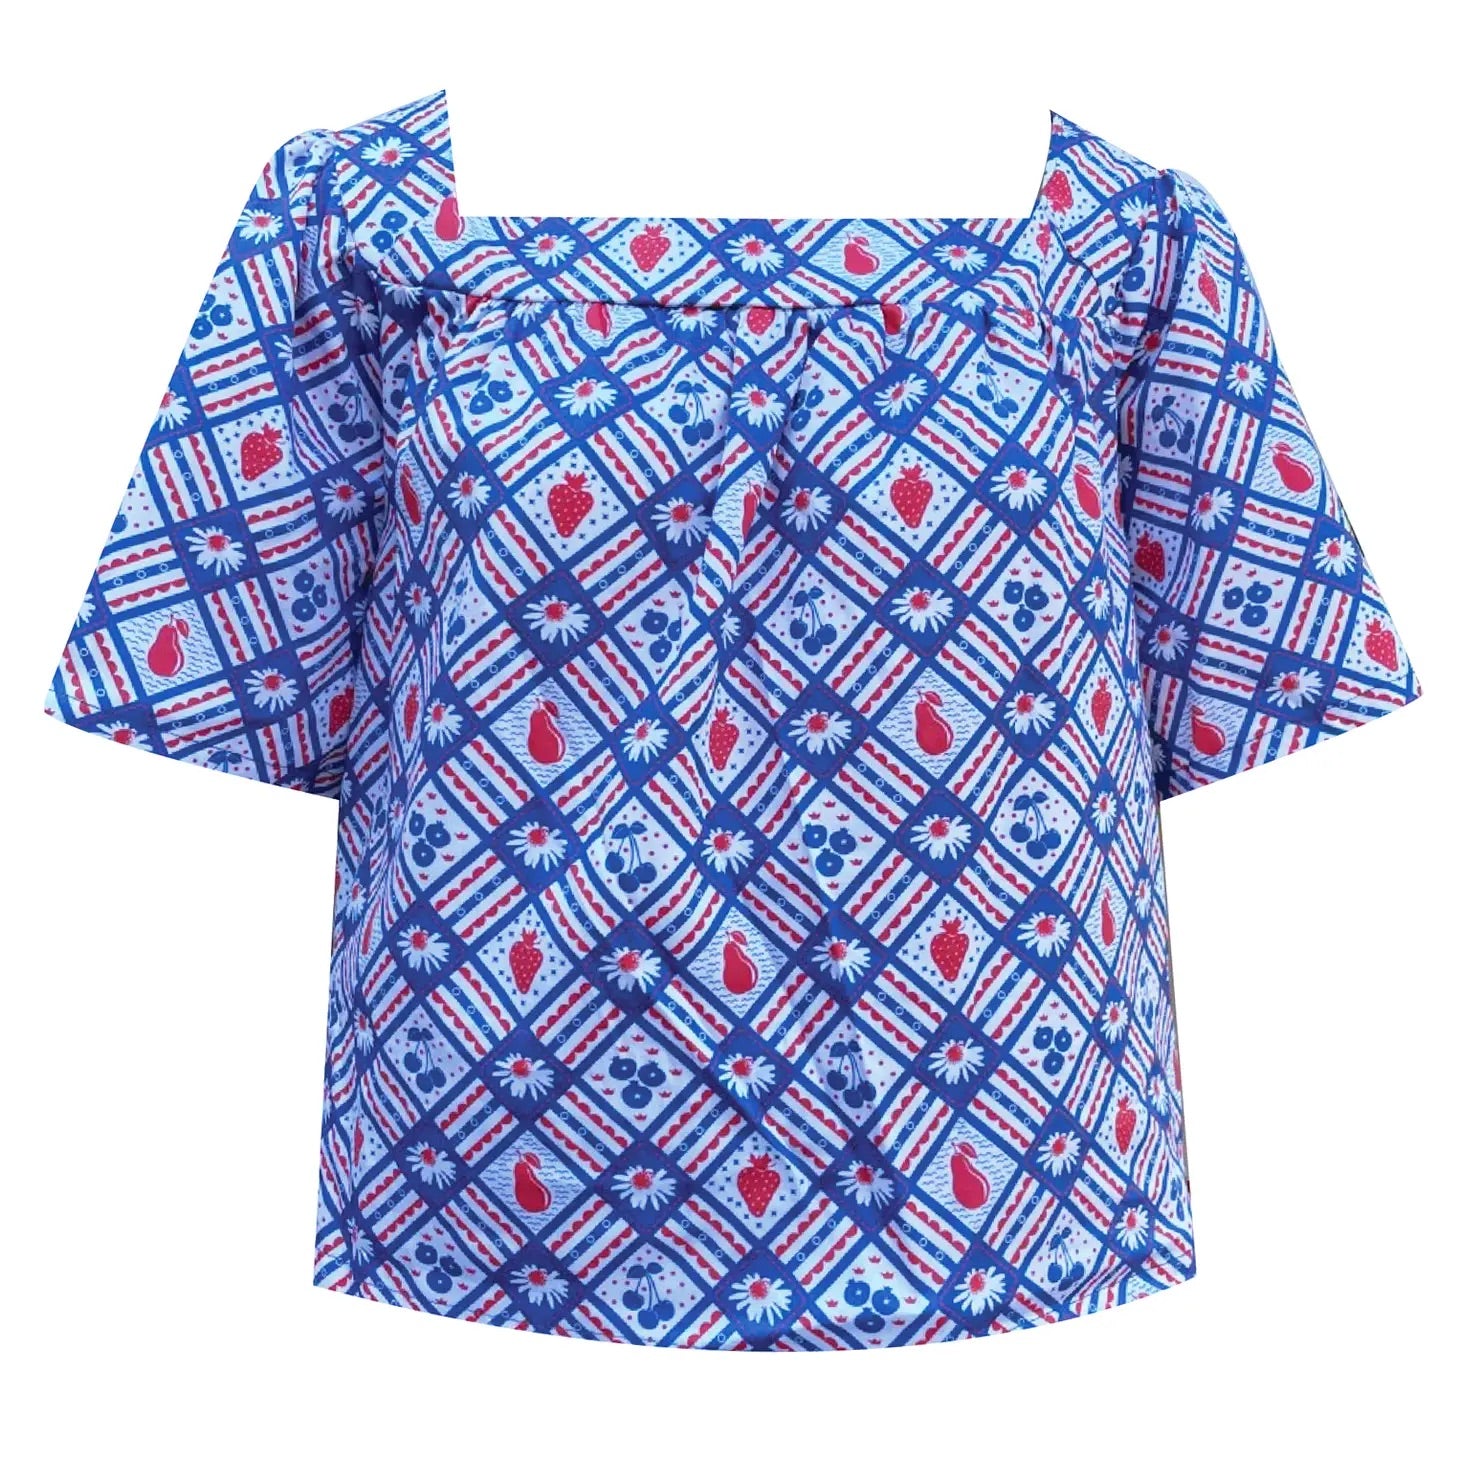 A square necked and bell sleeved peasant style top with an all-over checkered pattern of daisies, strawberries, cherries, blueberries, and pears. Seen untucked